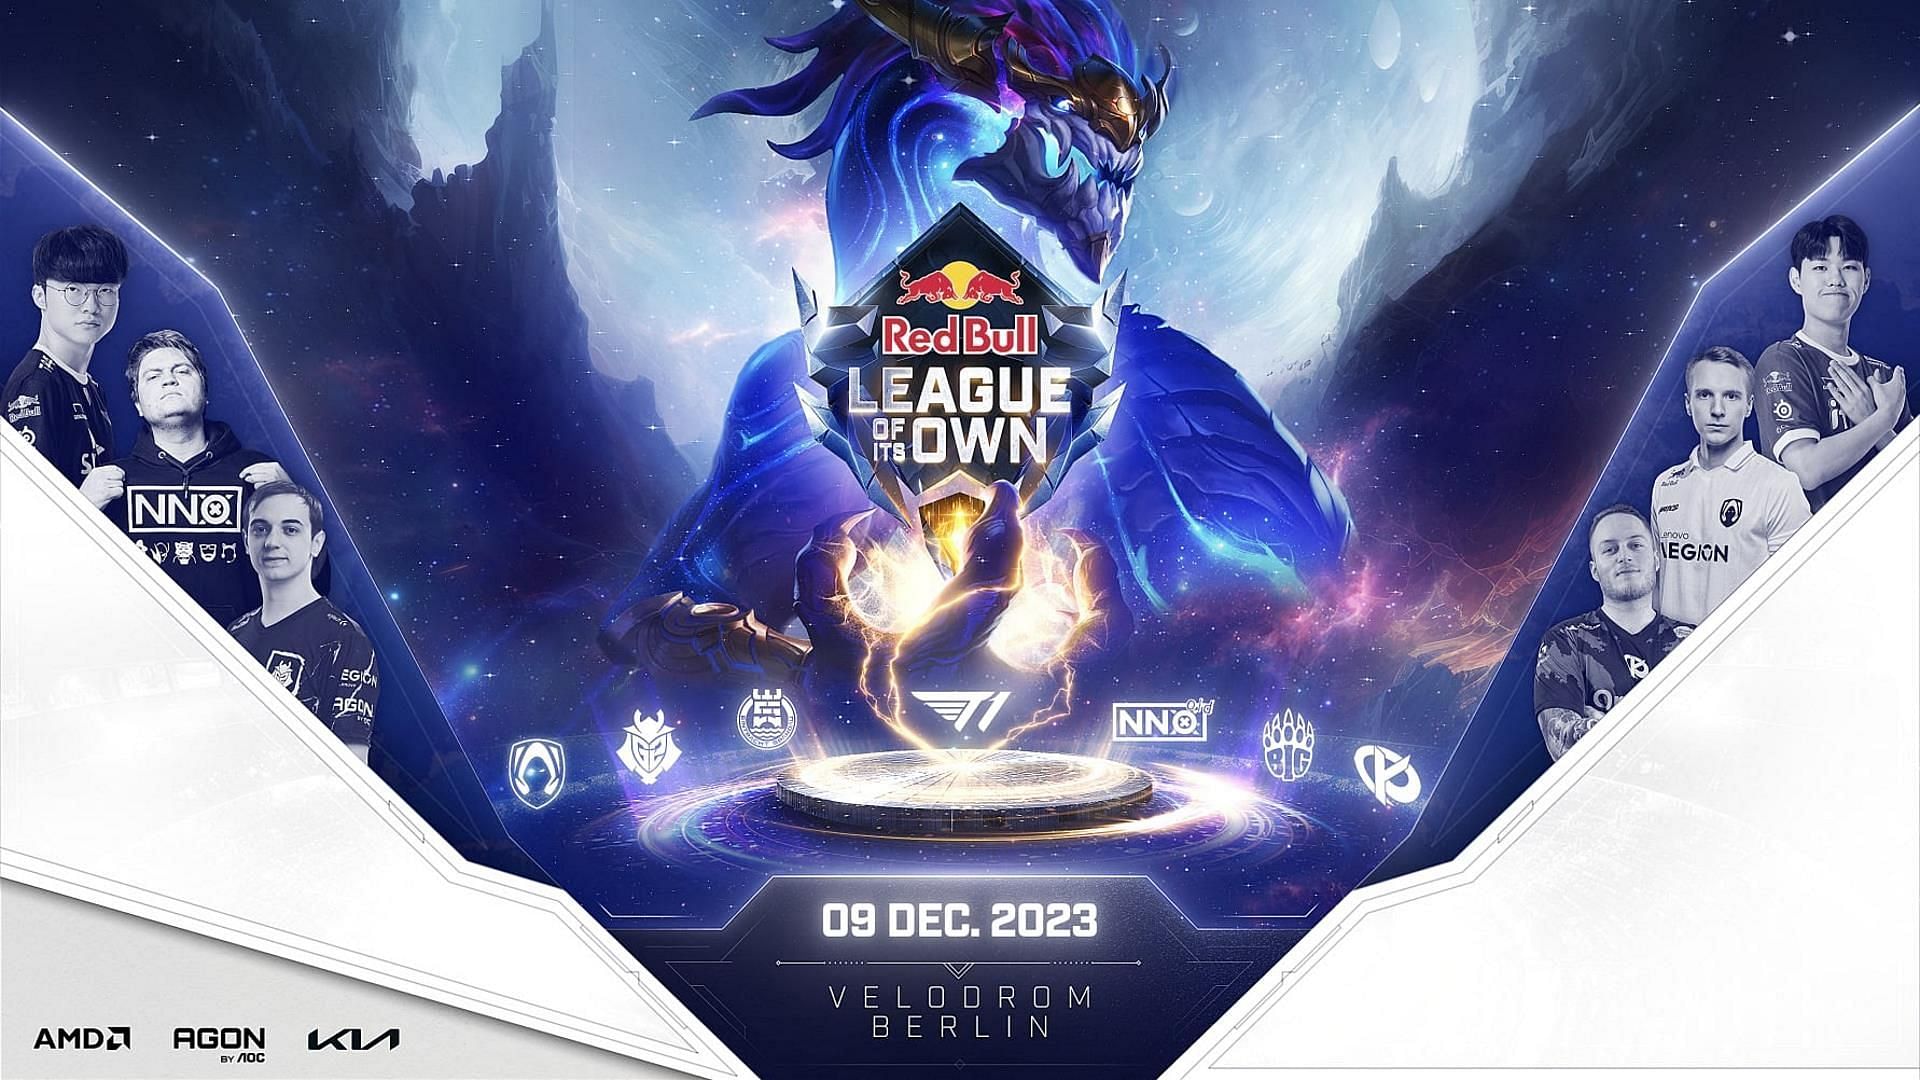 All details about the League of Legends Red Bull League of Its Own event (Image via Red Bull Gaming)